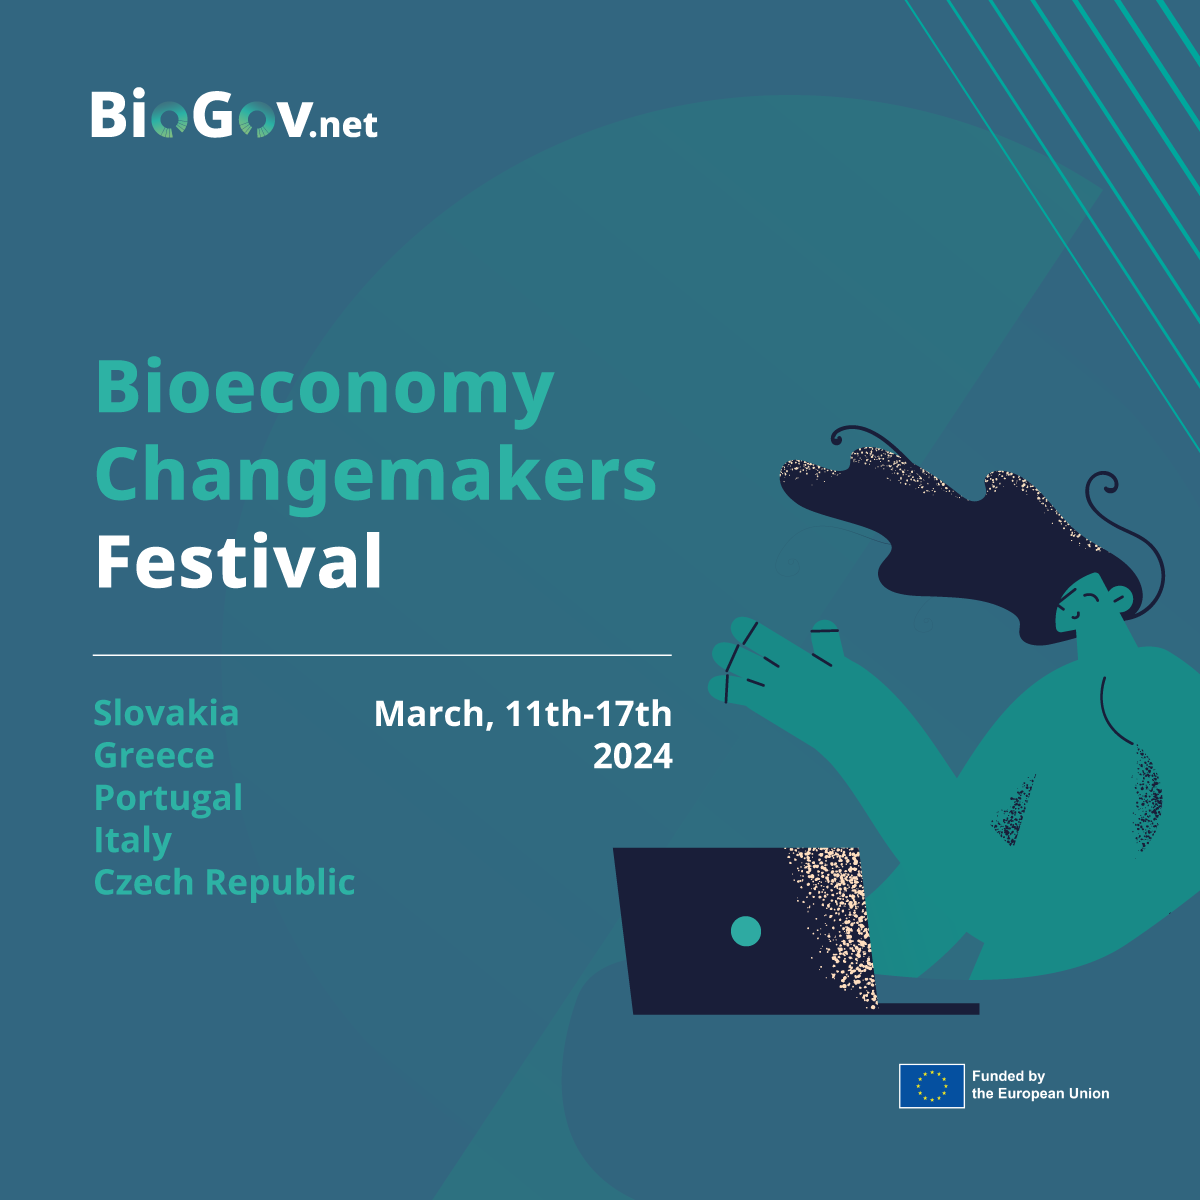 Highlights from the Bioeconomy Changemakers Festival 